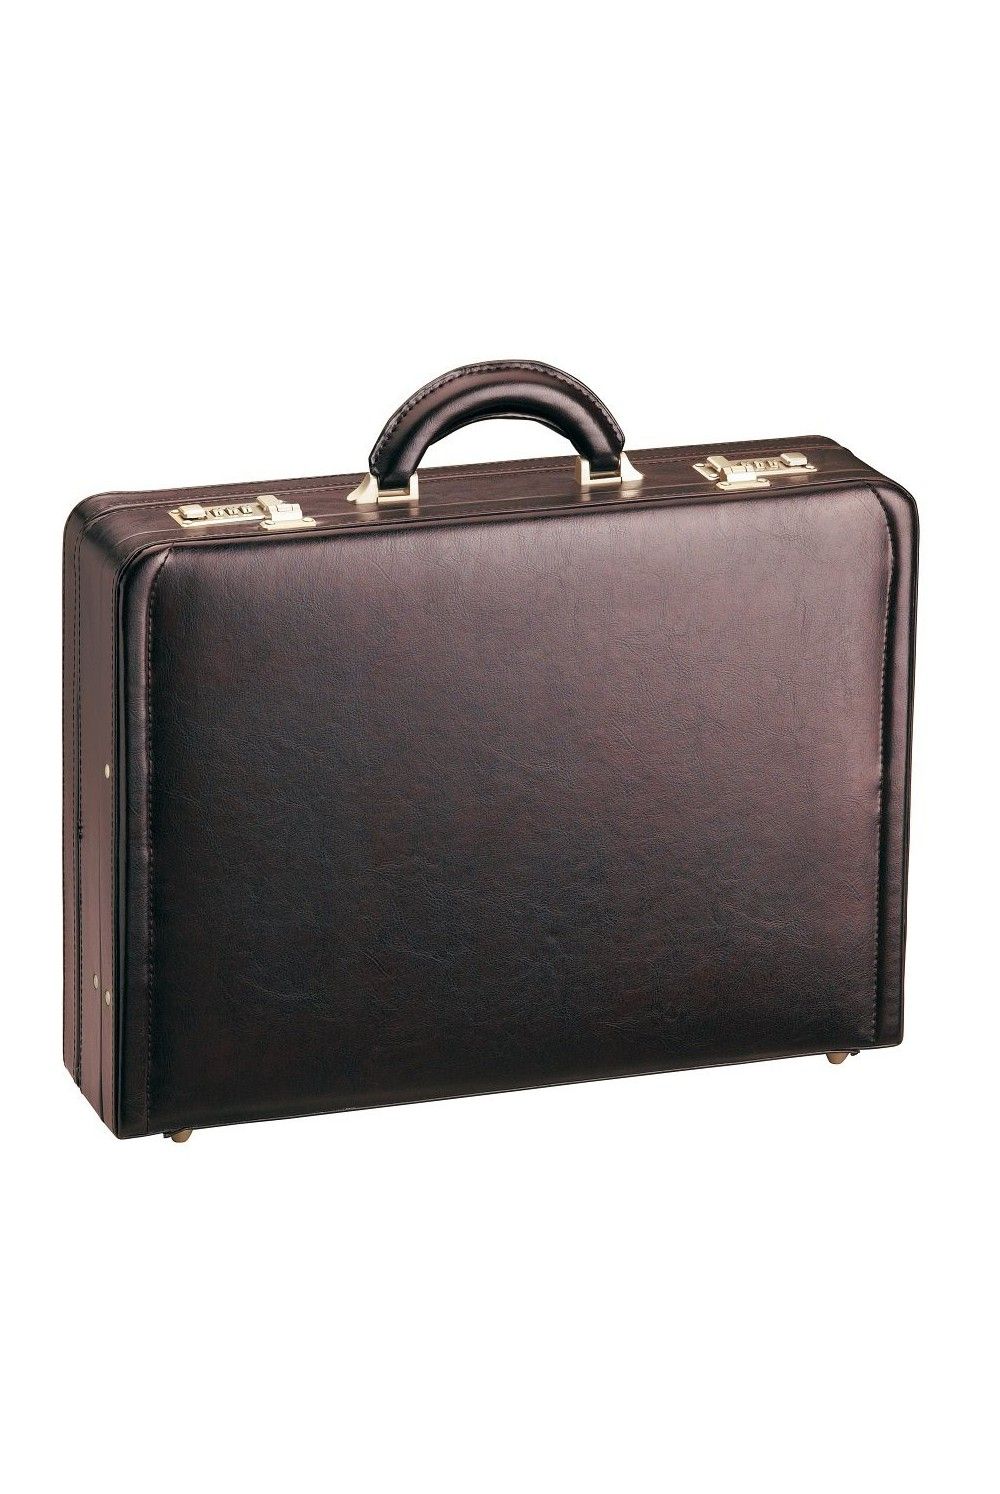 D & N briefcase leather 2663